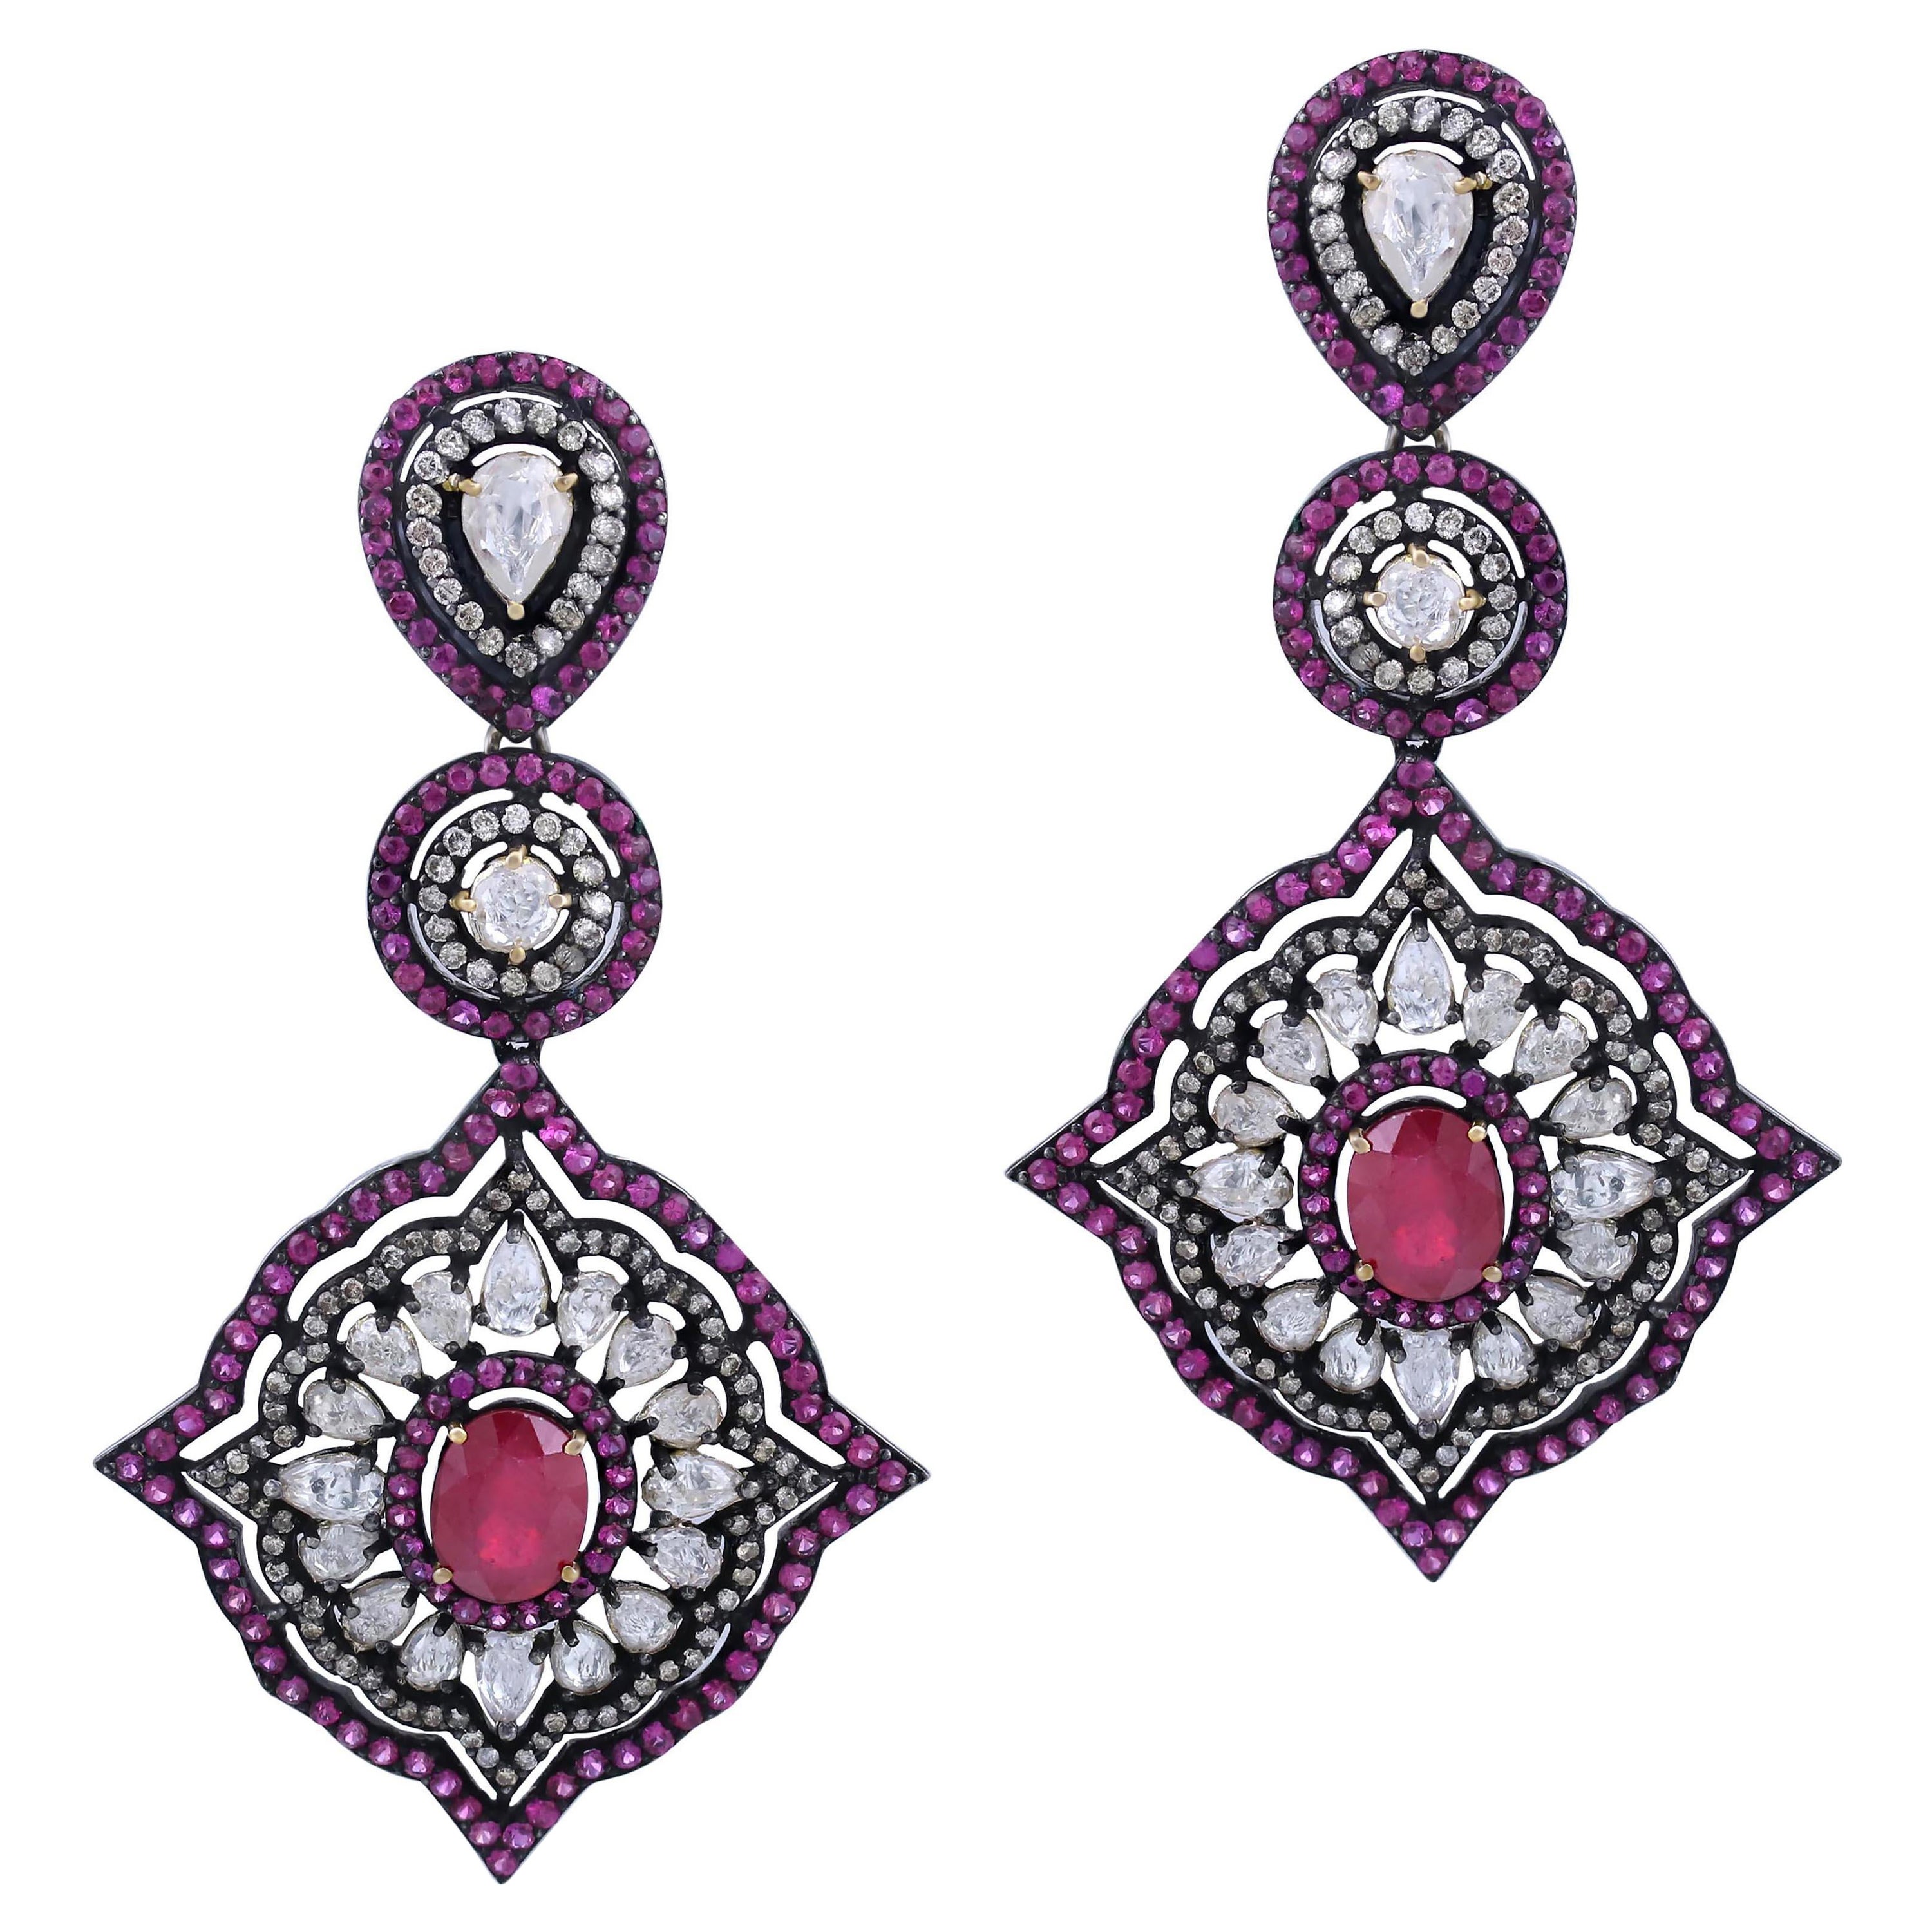 Victorian 19.2 Cttw. Ruby, Sapphire and Diamond Drop Earrings in 18k/925 Silver